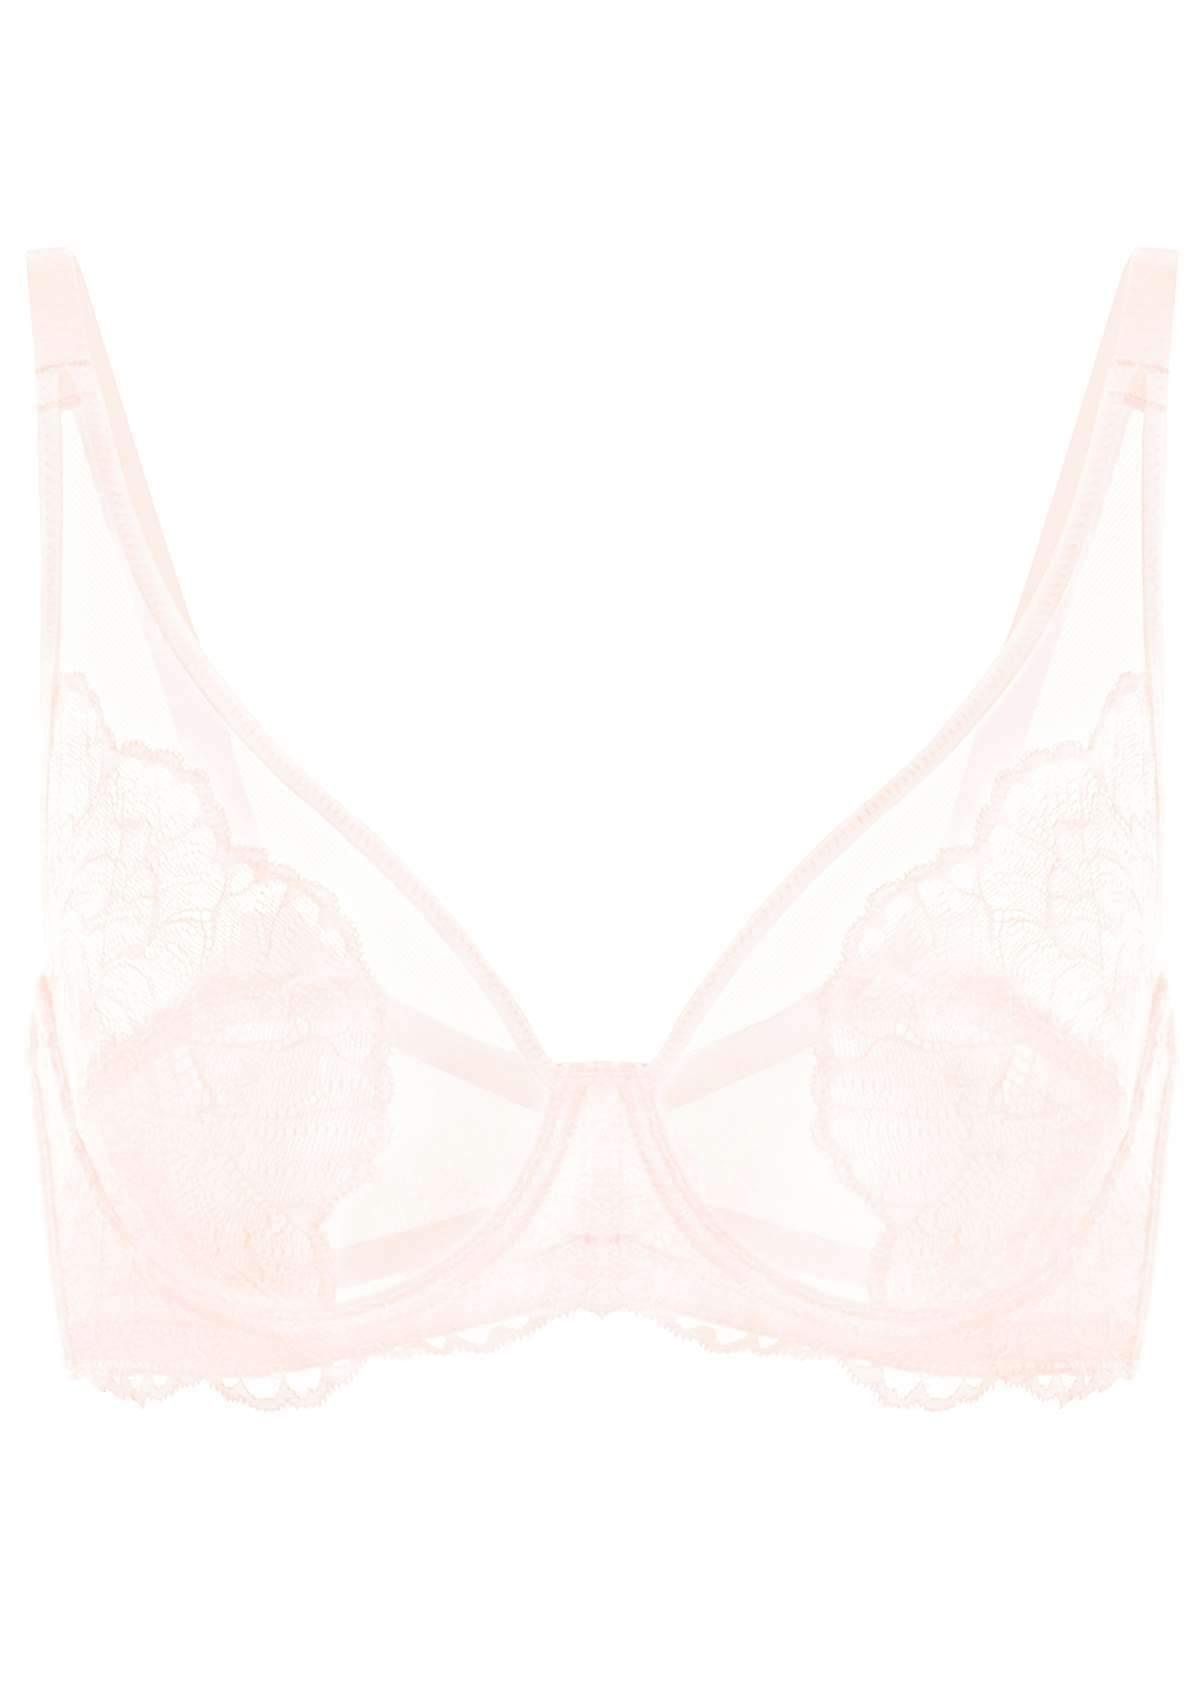 HSIA Blossom Sheer Lace Bra: Comfortable Underwire Bra For Big Busts - Dusty Peach / 40 / H